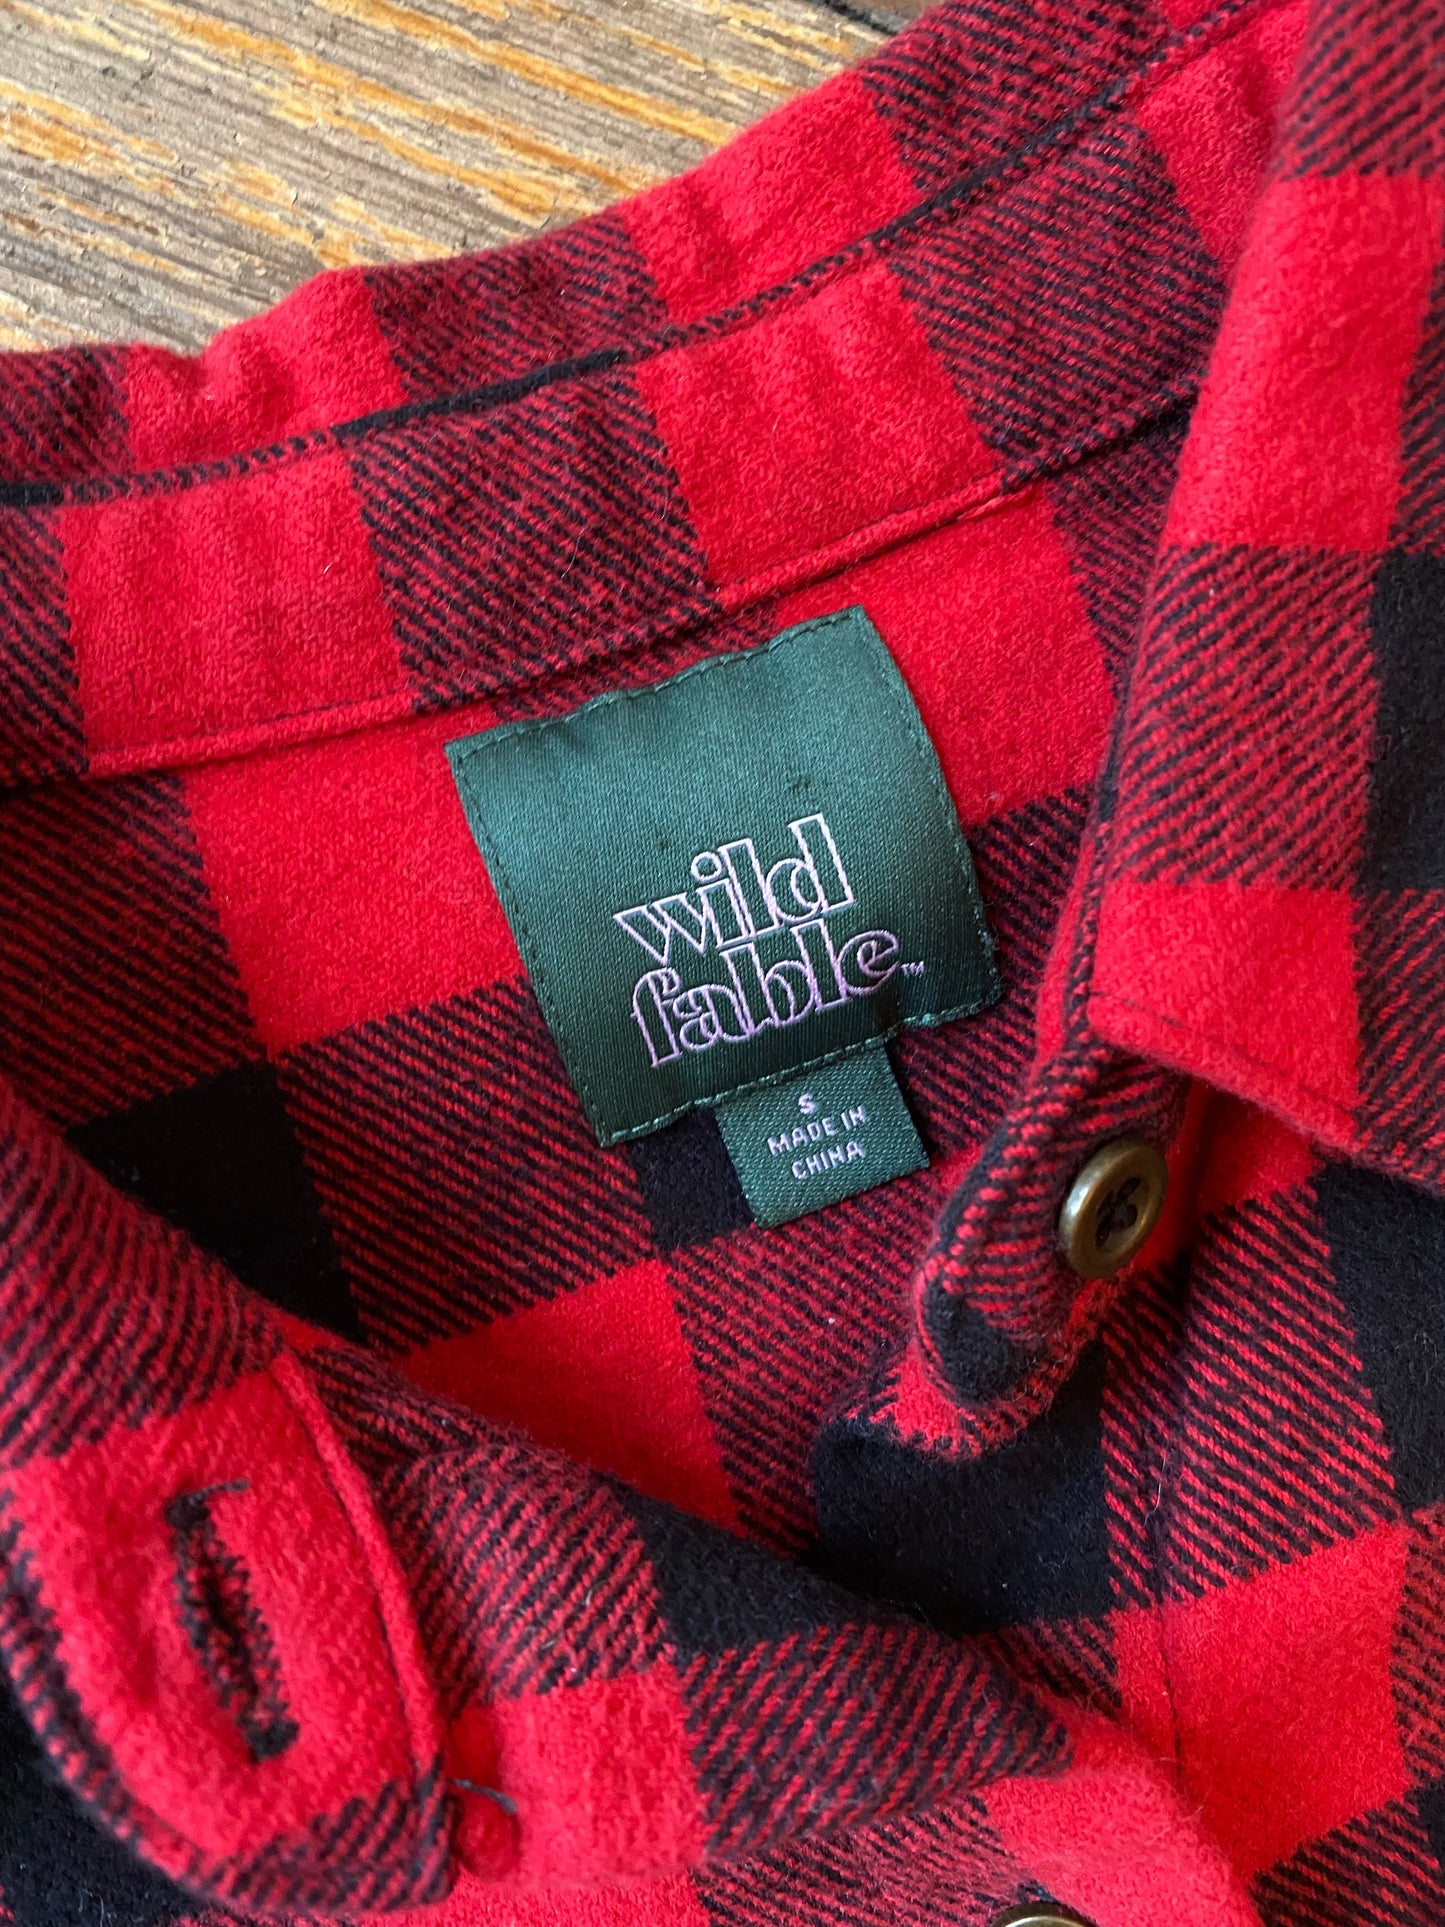 Classic Red Flannel